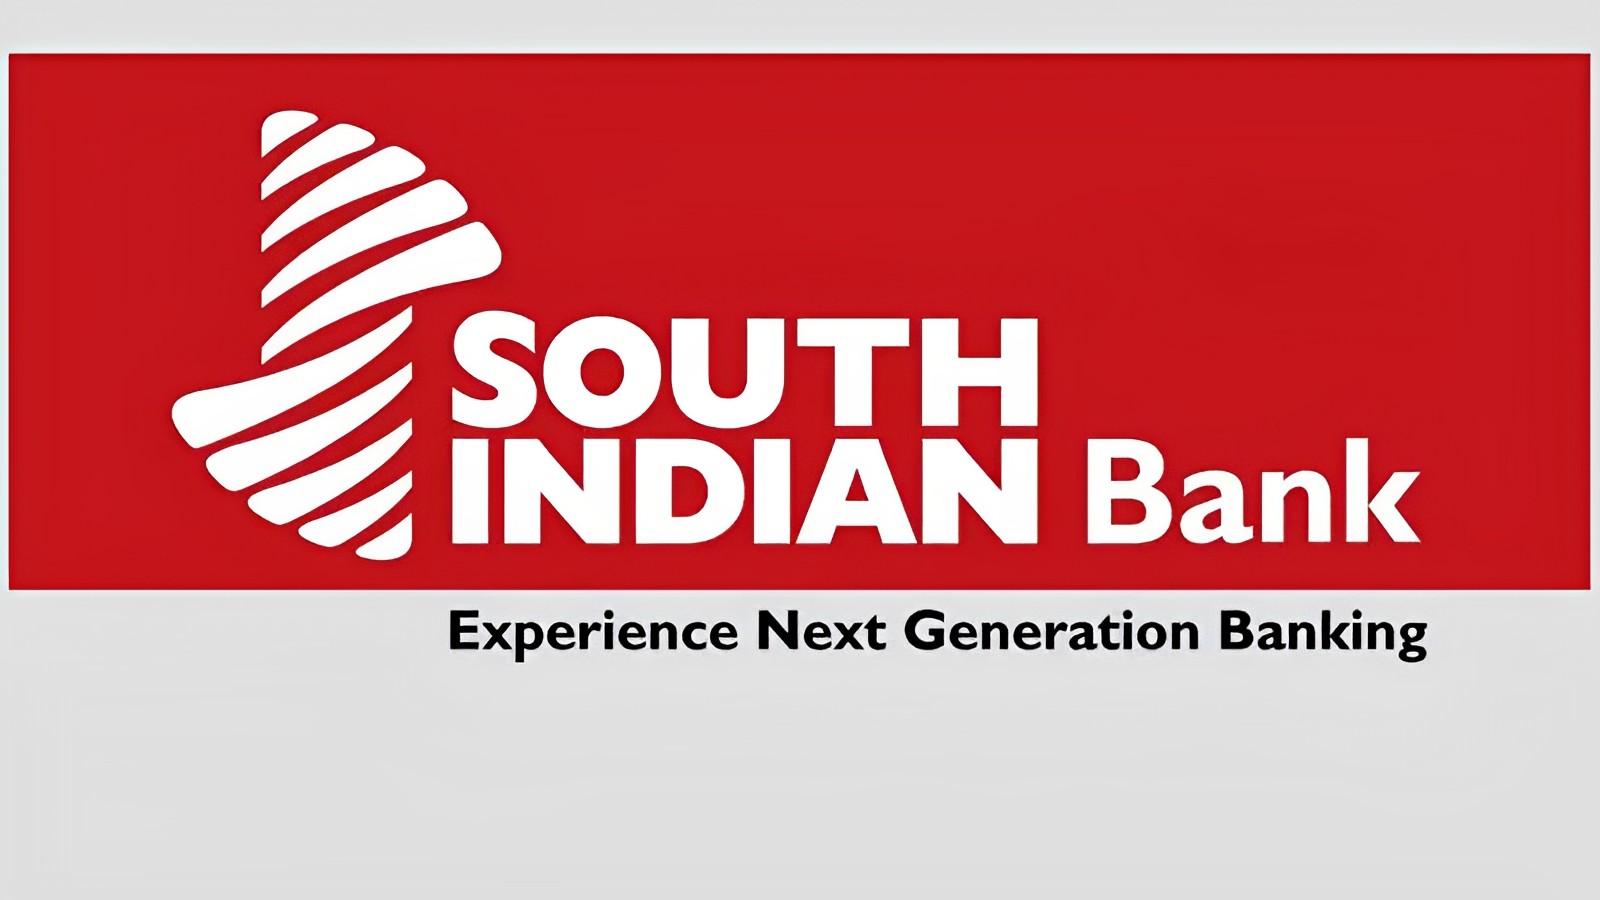 South Indian Bank signs MoU with SAIL for financing of dealers